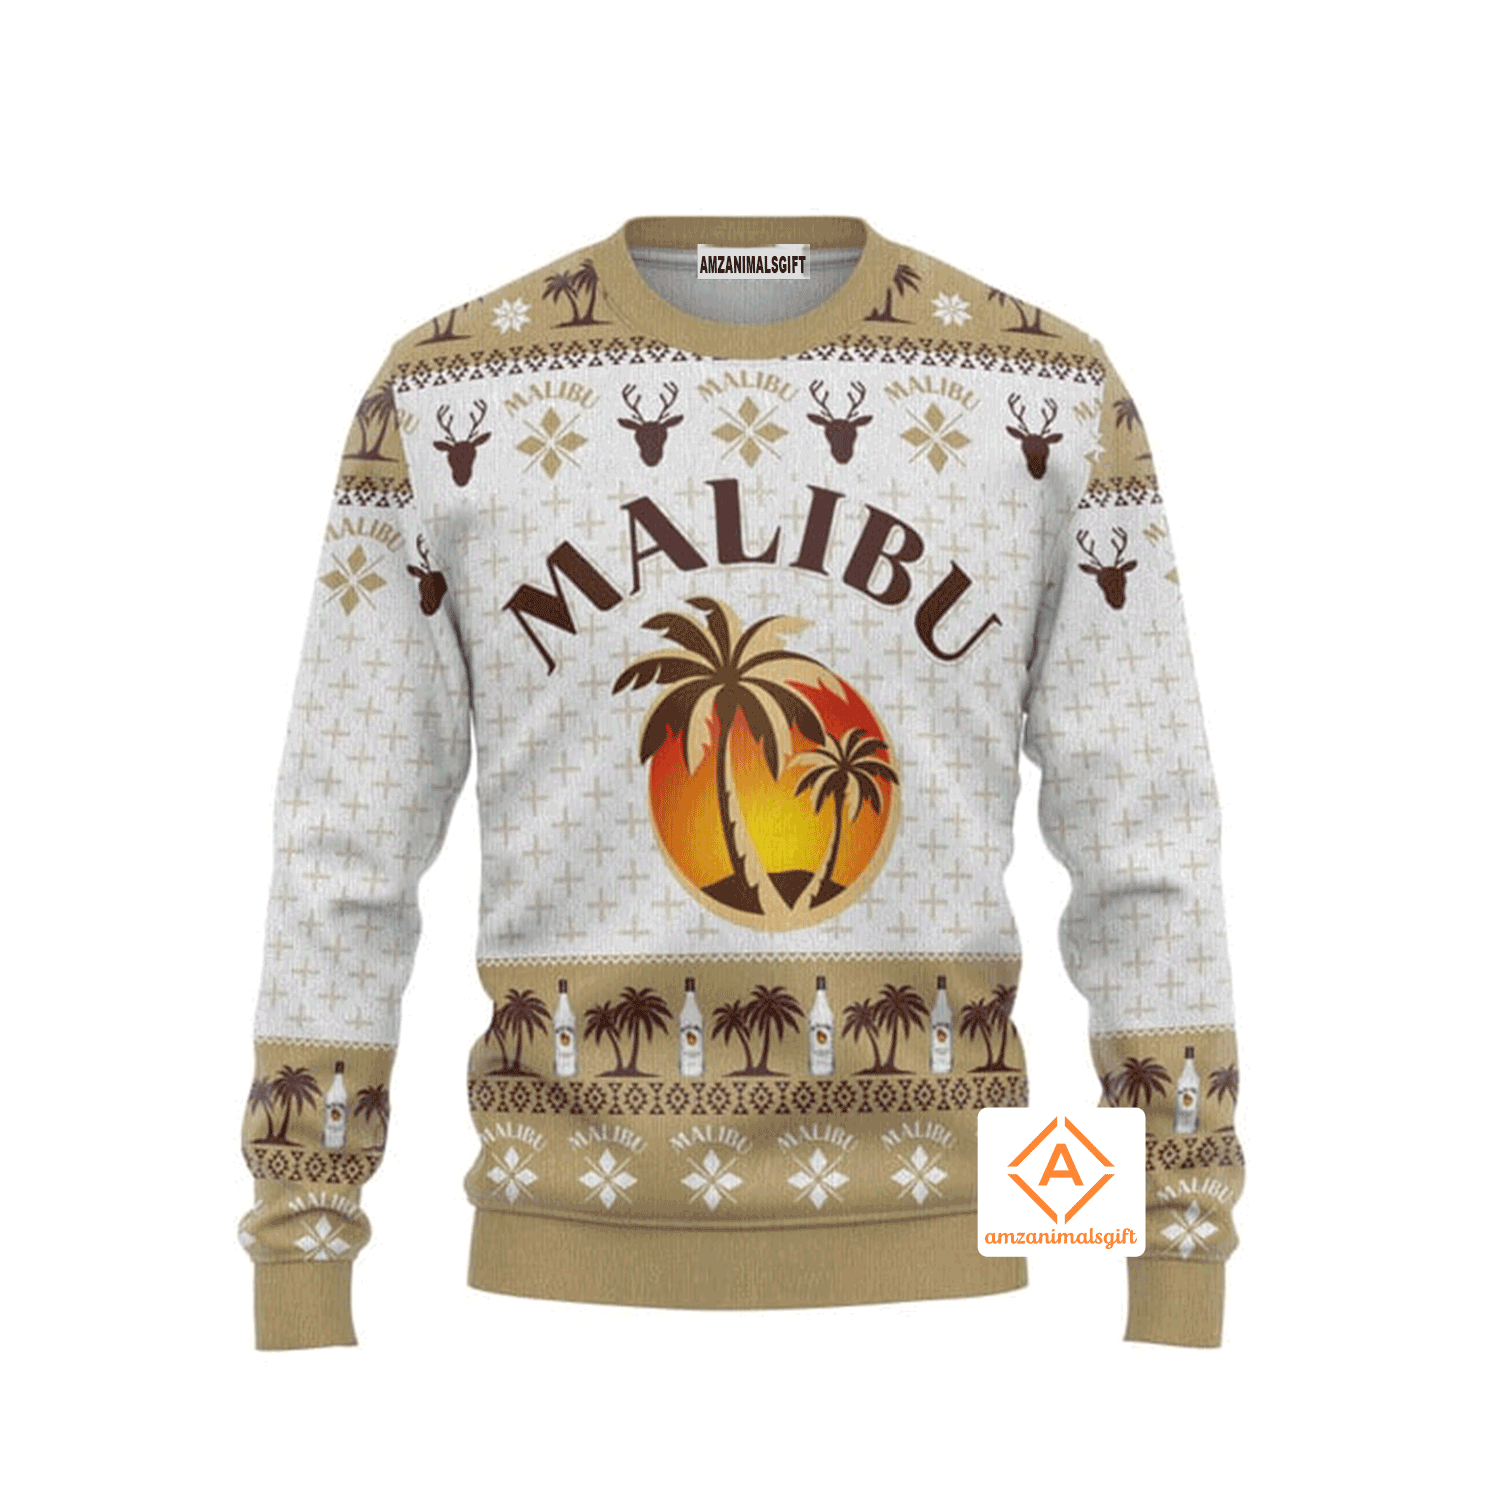 Malibu Vintage Christmas Sweater, Ugly Sweater For Men & Women, Perfect Outfit For Christmas New Year Autumn Winter